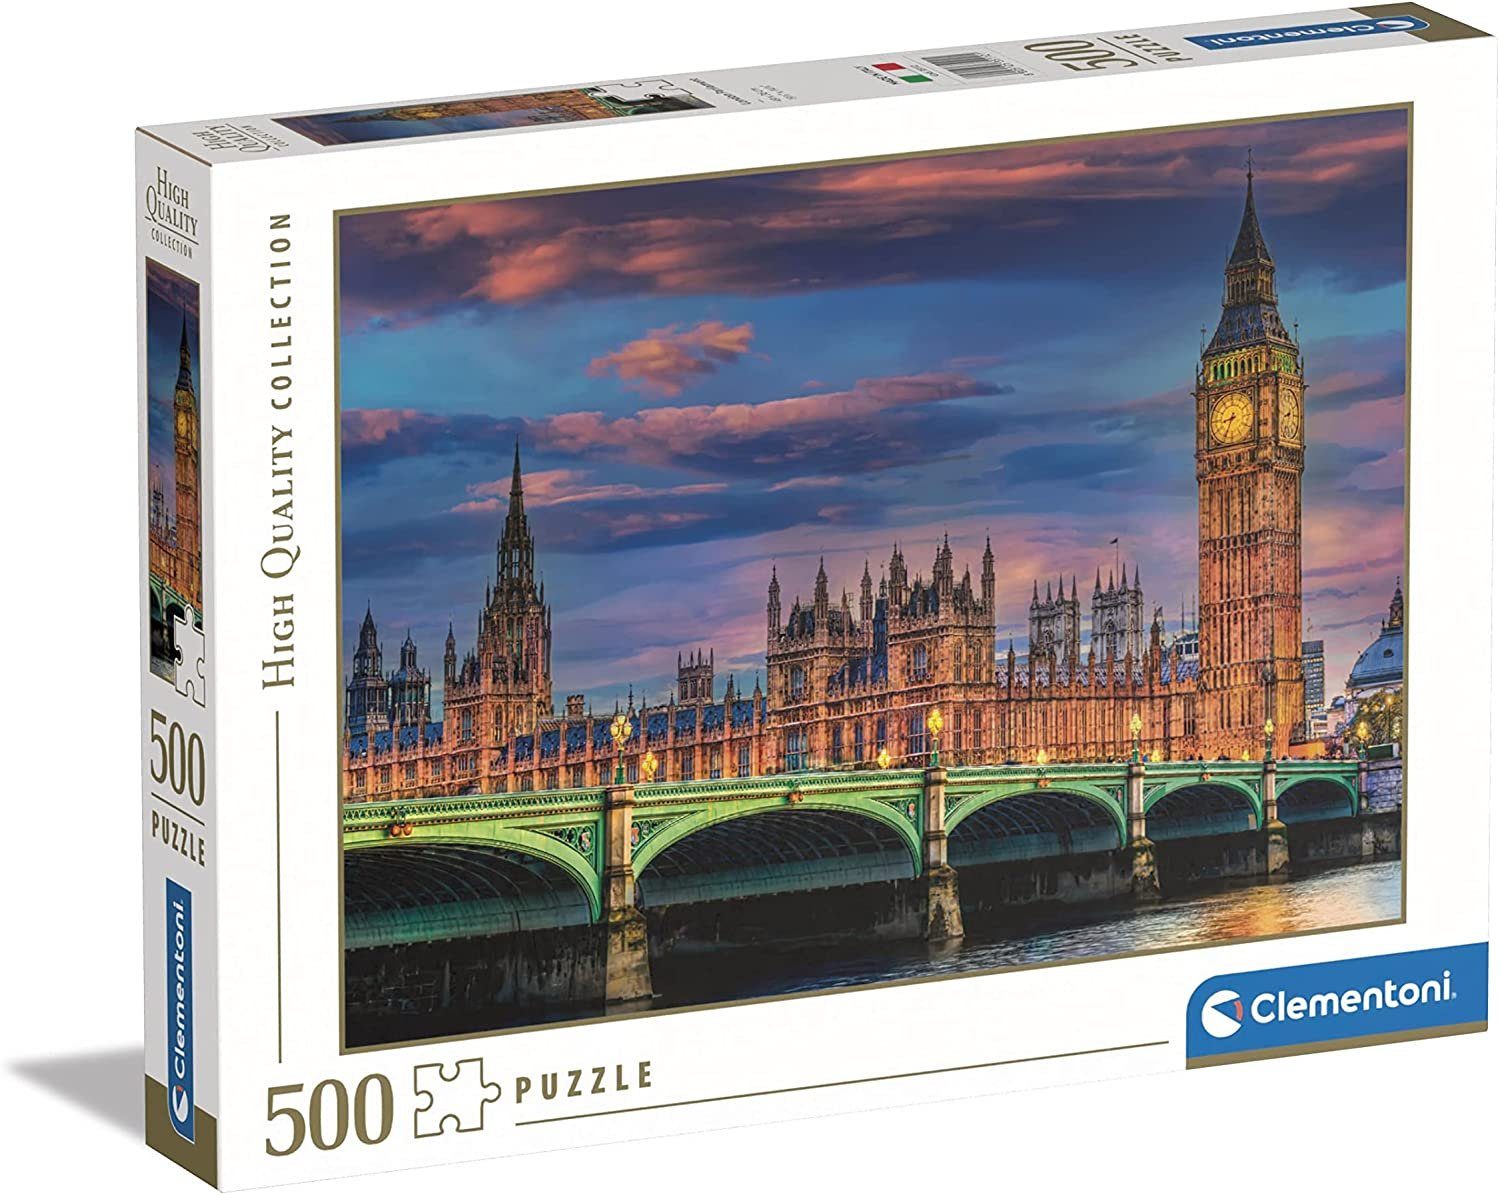 Clementoni® Puzzle Puzzles bis 500 in Teile Europe Puzzleteile, Made Clem-35112